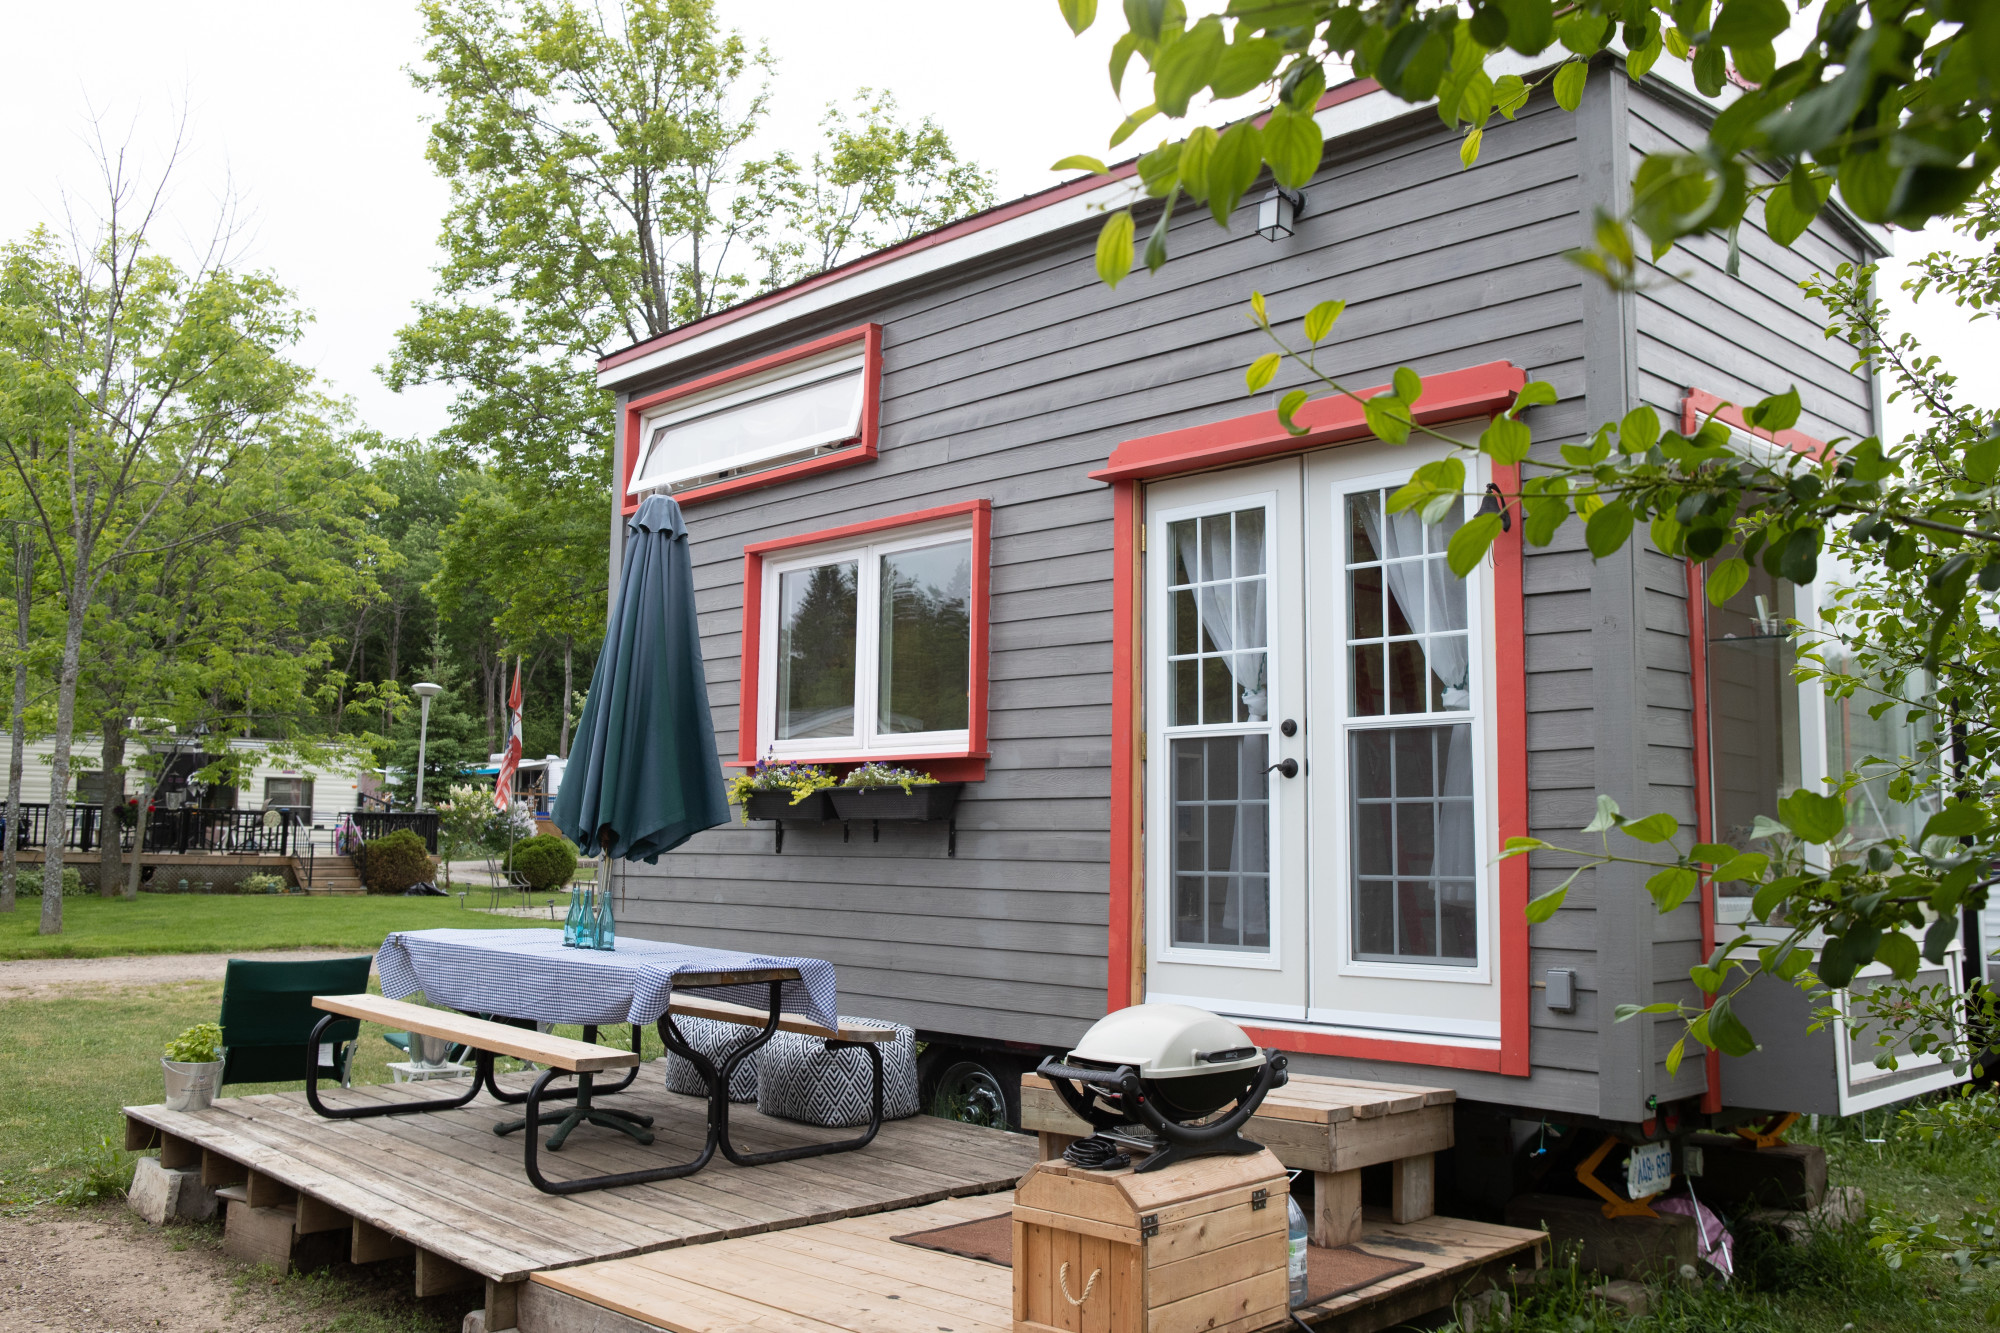 You don't have a ton of space in a tiny home. Maximize every square inch by tapping into the suggestions and ideas shared in this roundup!